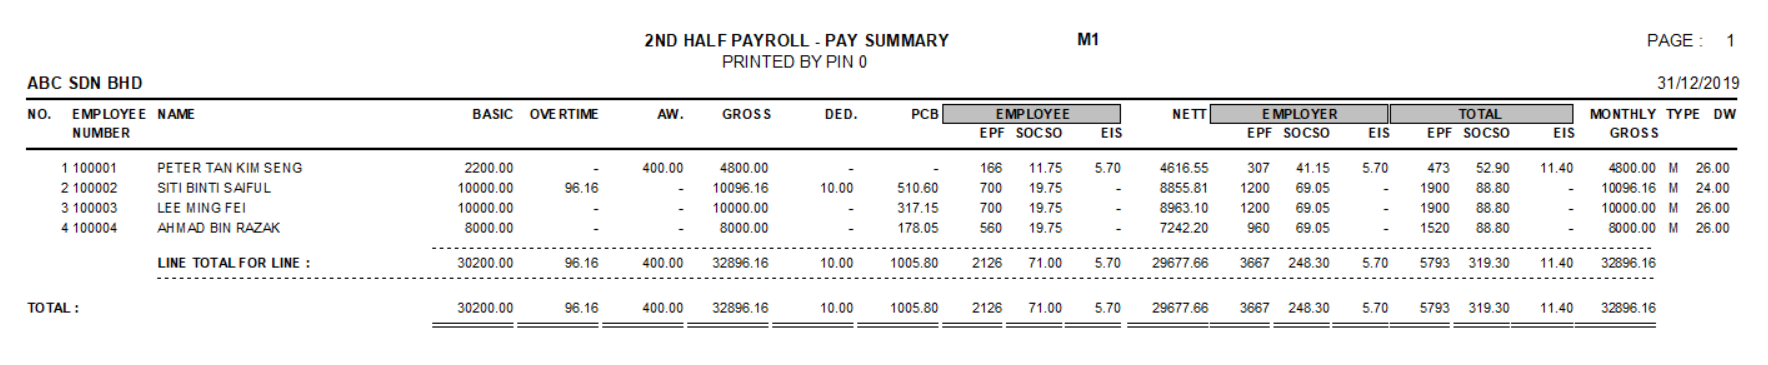 Access UBS Payroll Software - Pay 60 (Compliance with EIS 2018)